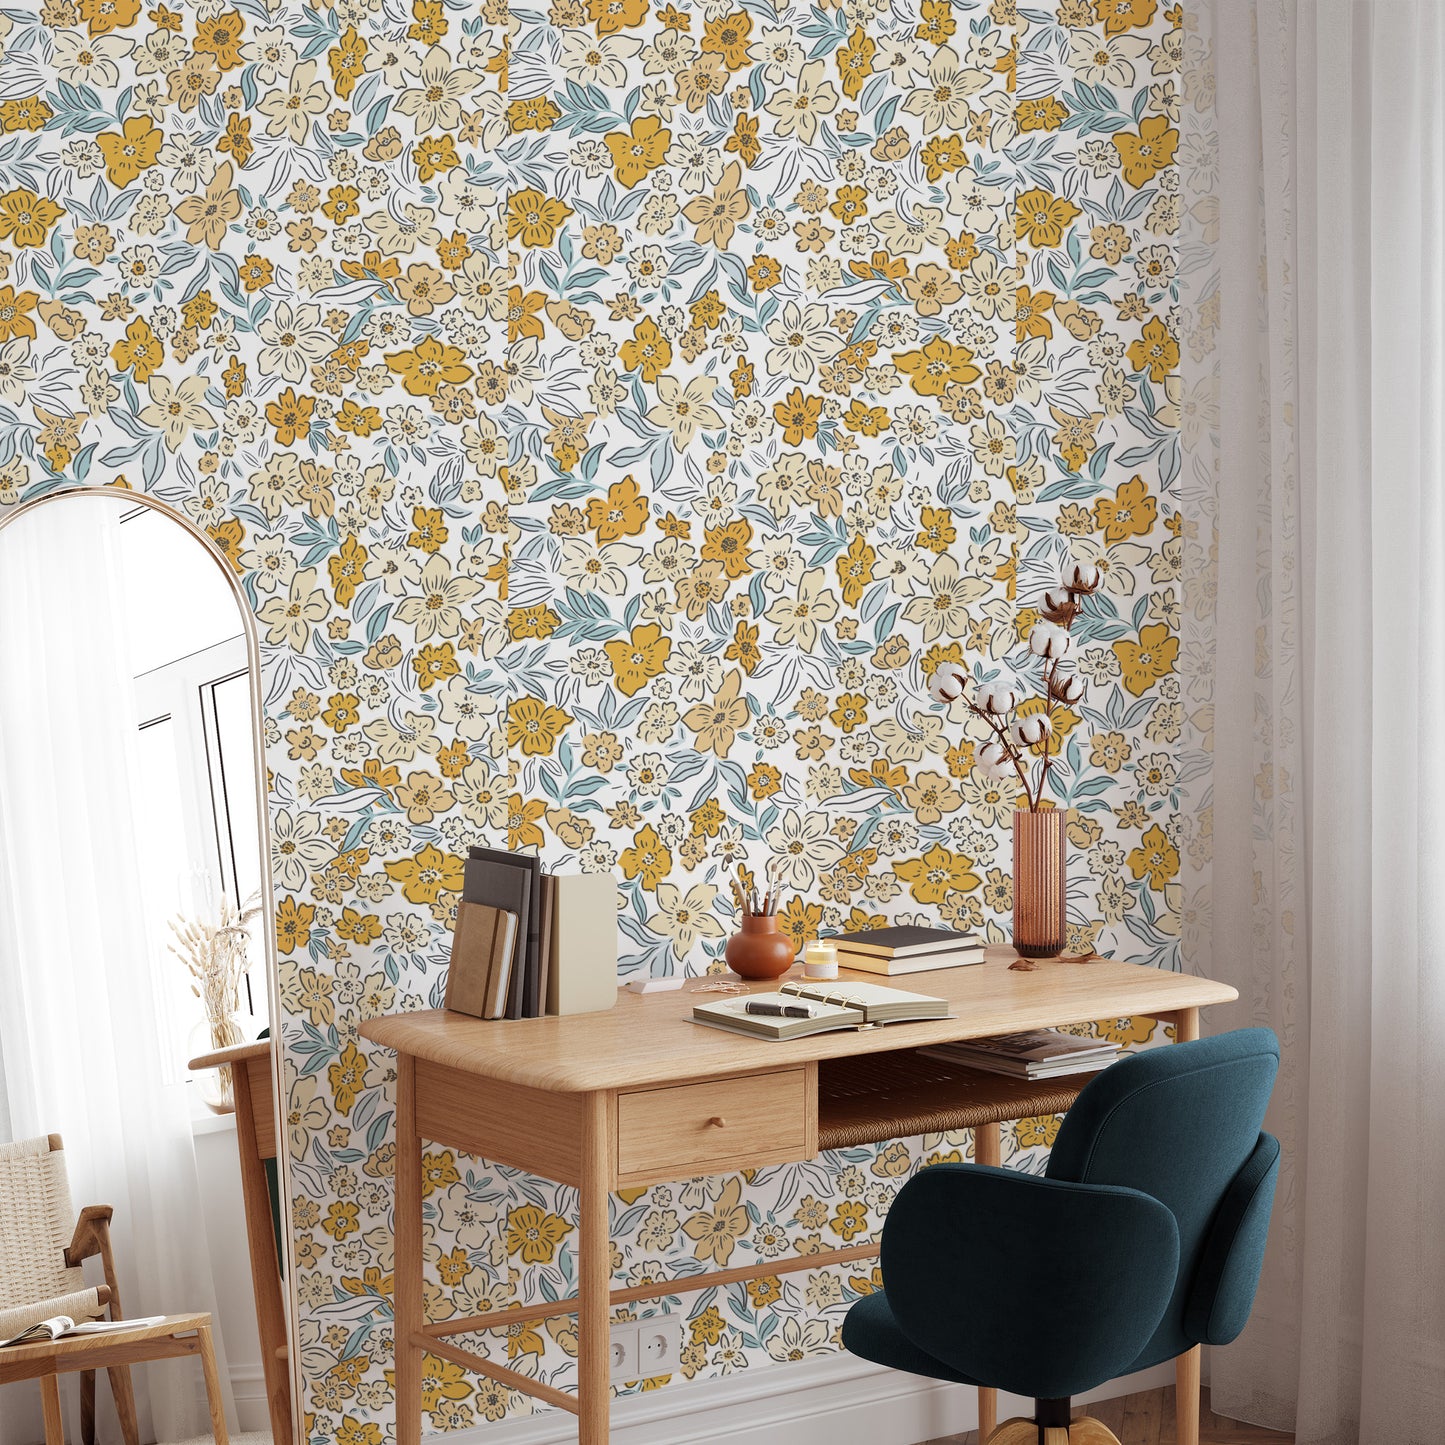 Introducing our Sweet Meadow Wallpaper in Sunshine Yellow, featuring a charming array of vibrant botanicals and scattered flowers in a calming yellow hue shown in a full size image.